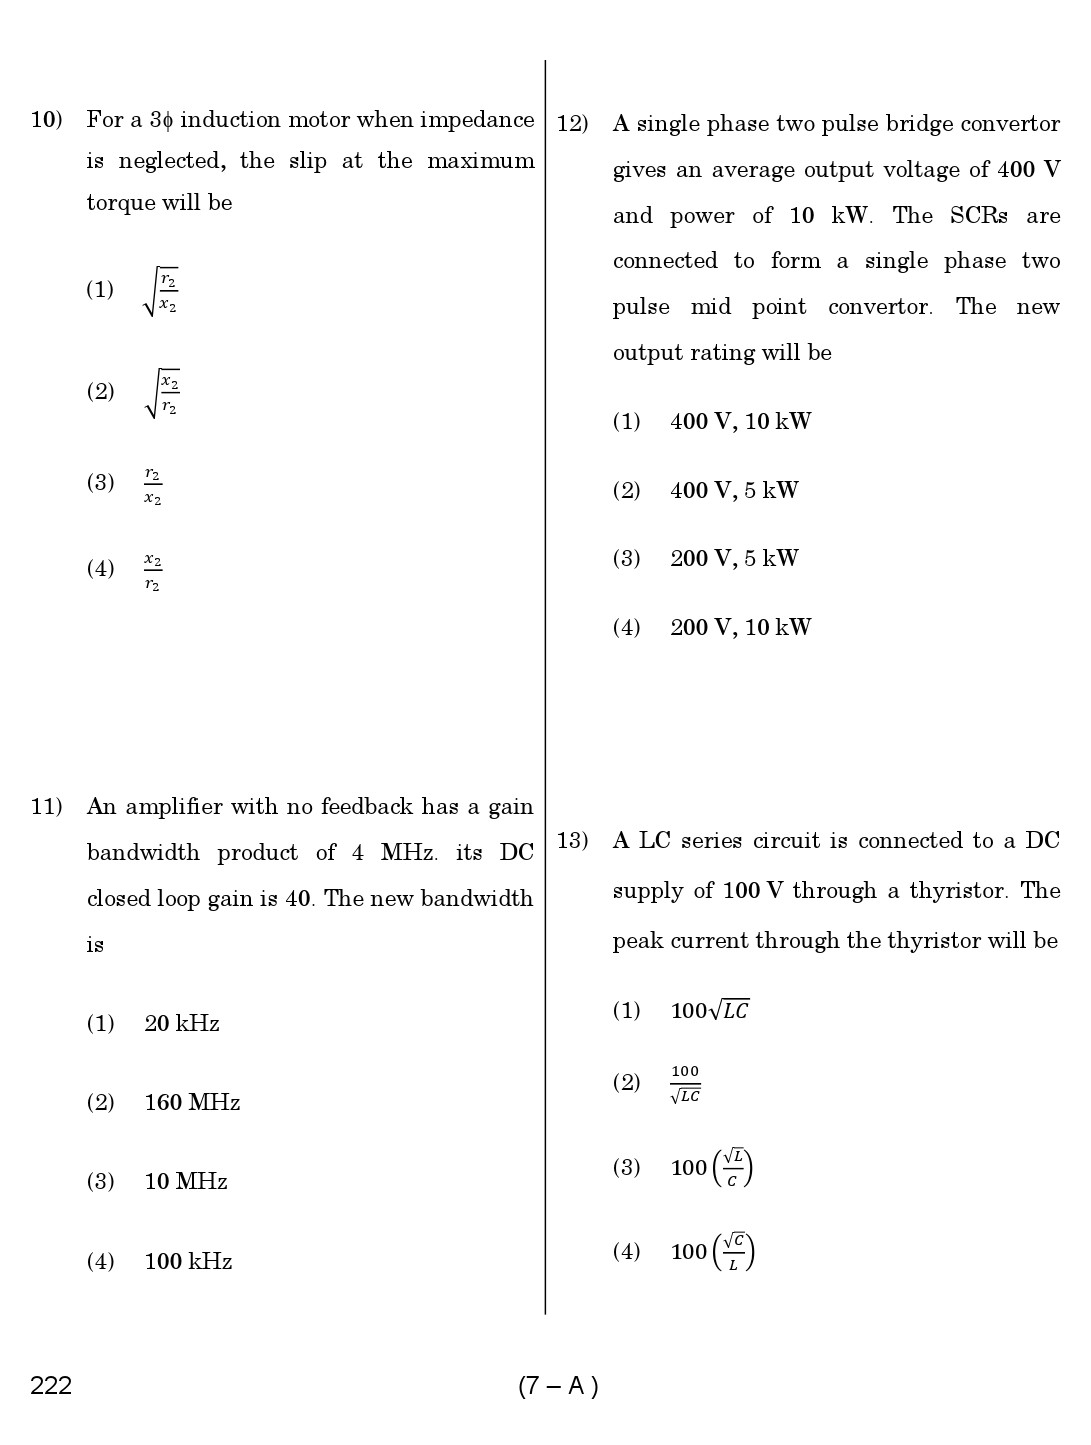 Karnataka PSC Assistant Engineer Electrical Exam Sample Question Paper 7